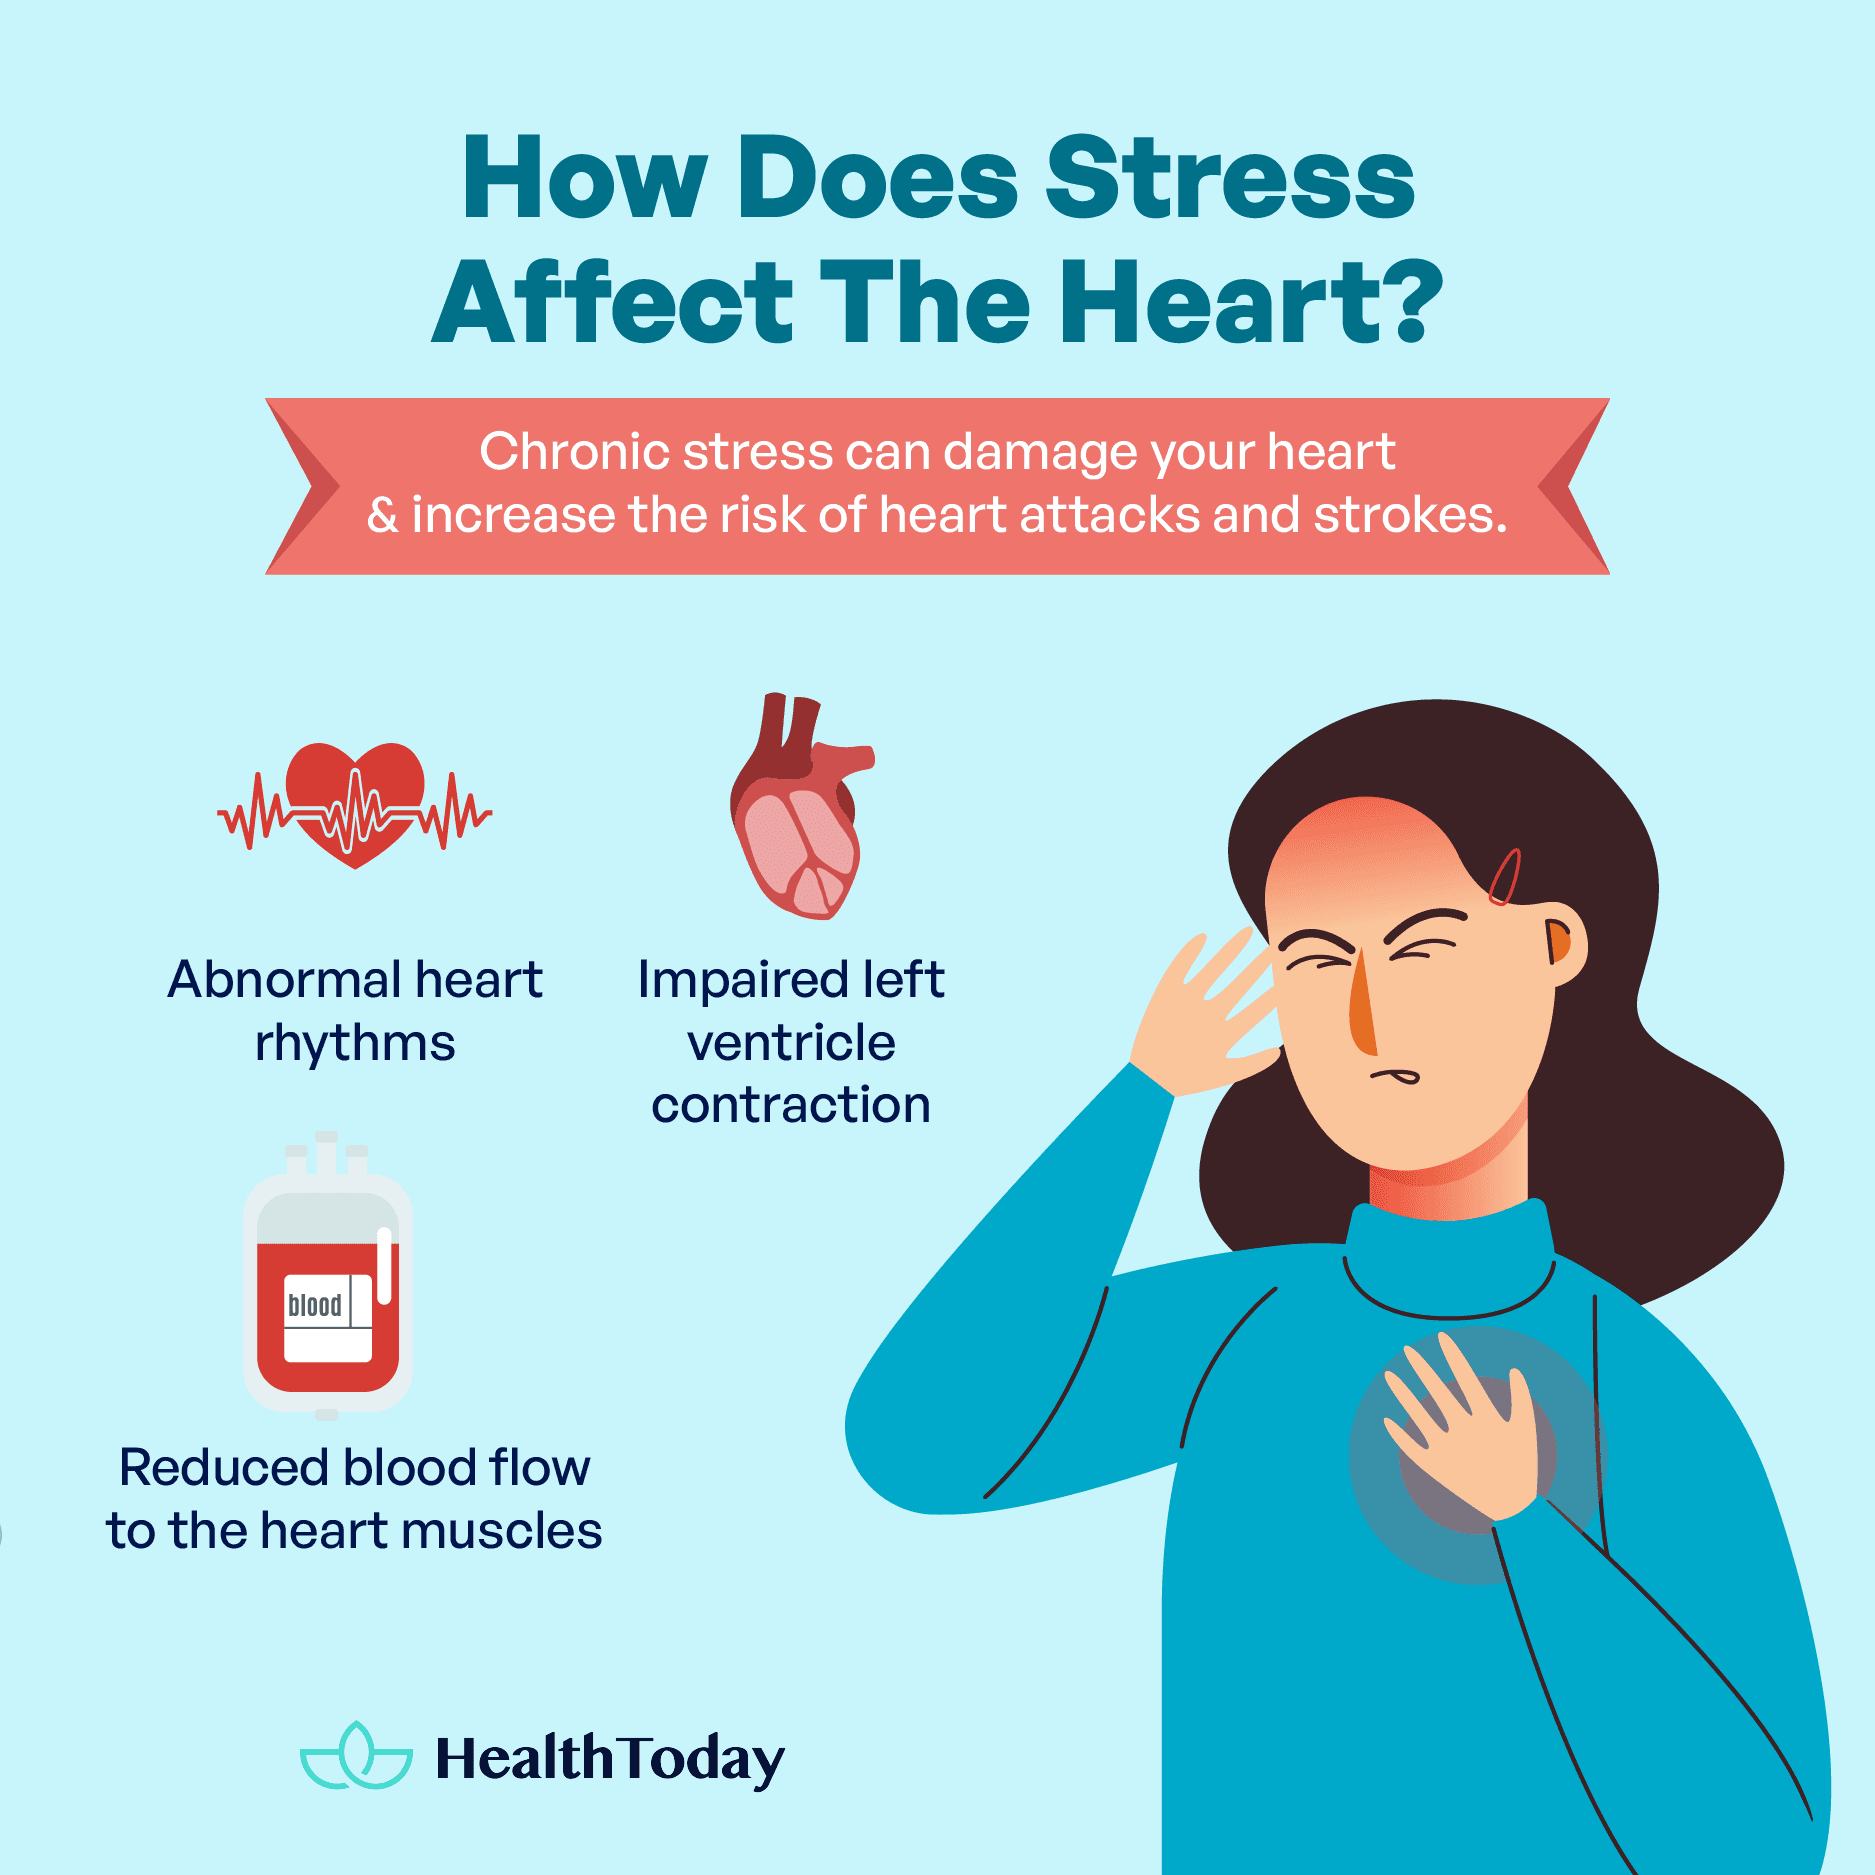 Does Stress Cause Heart Attacks